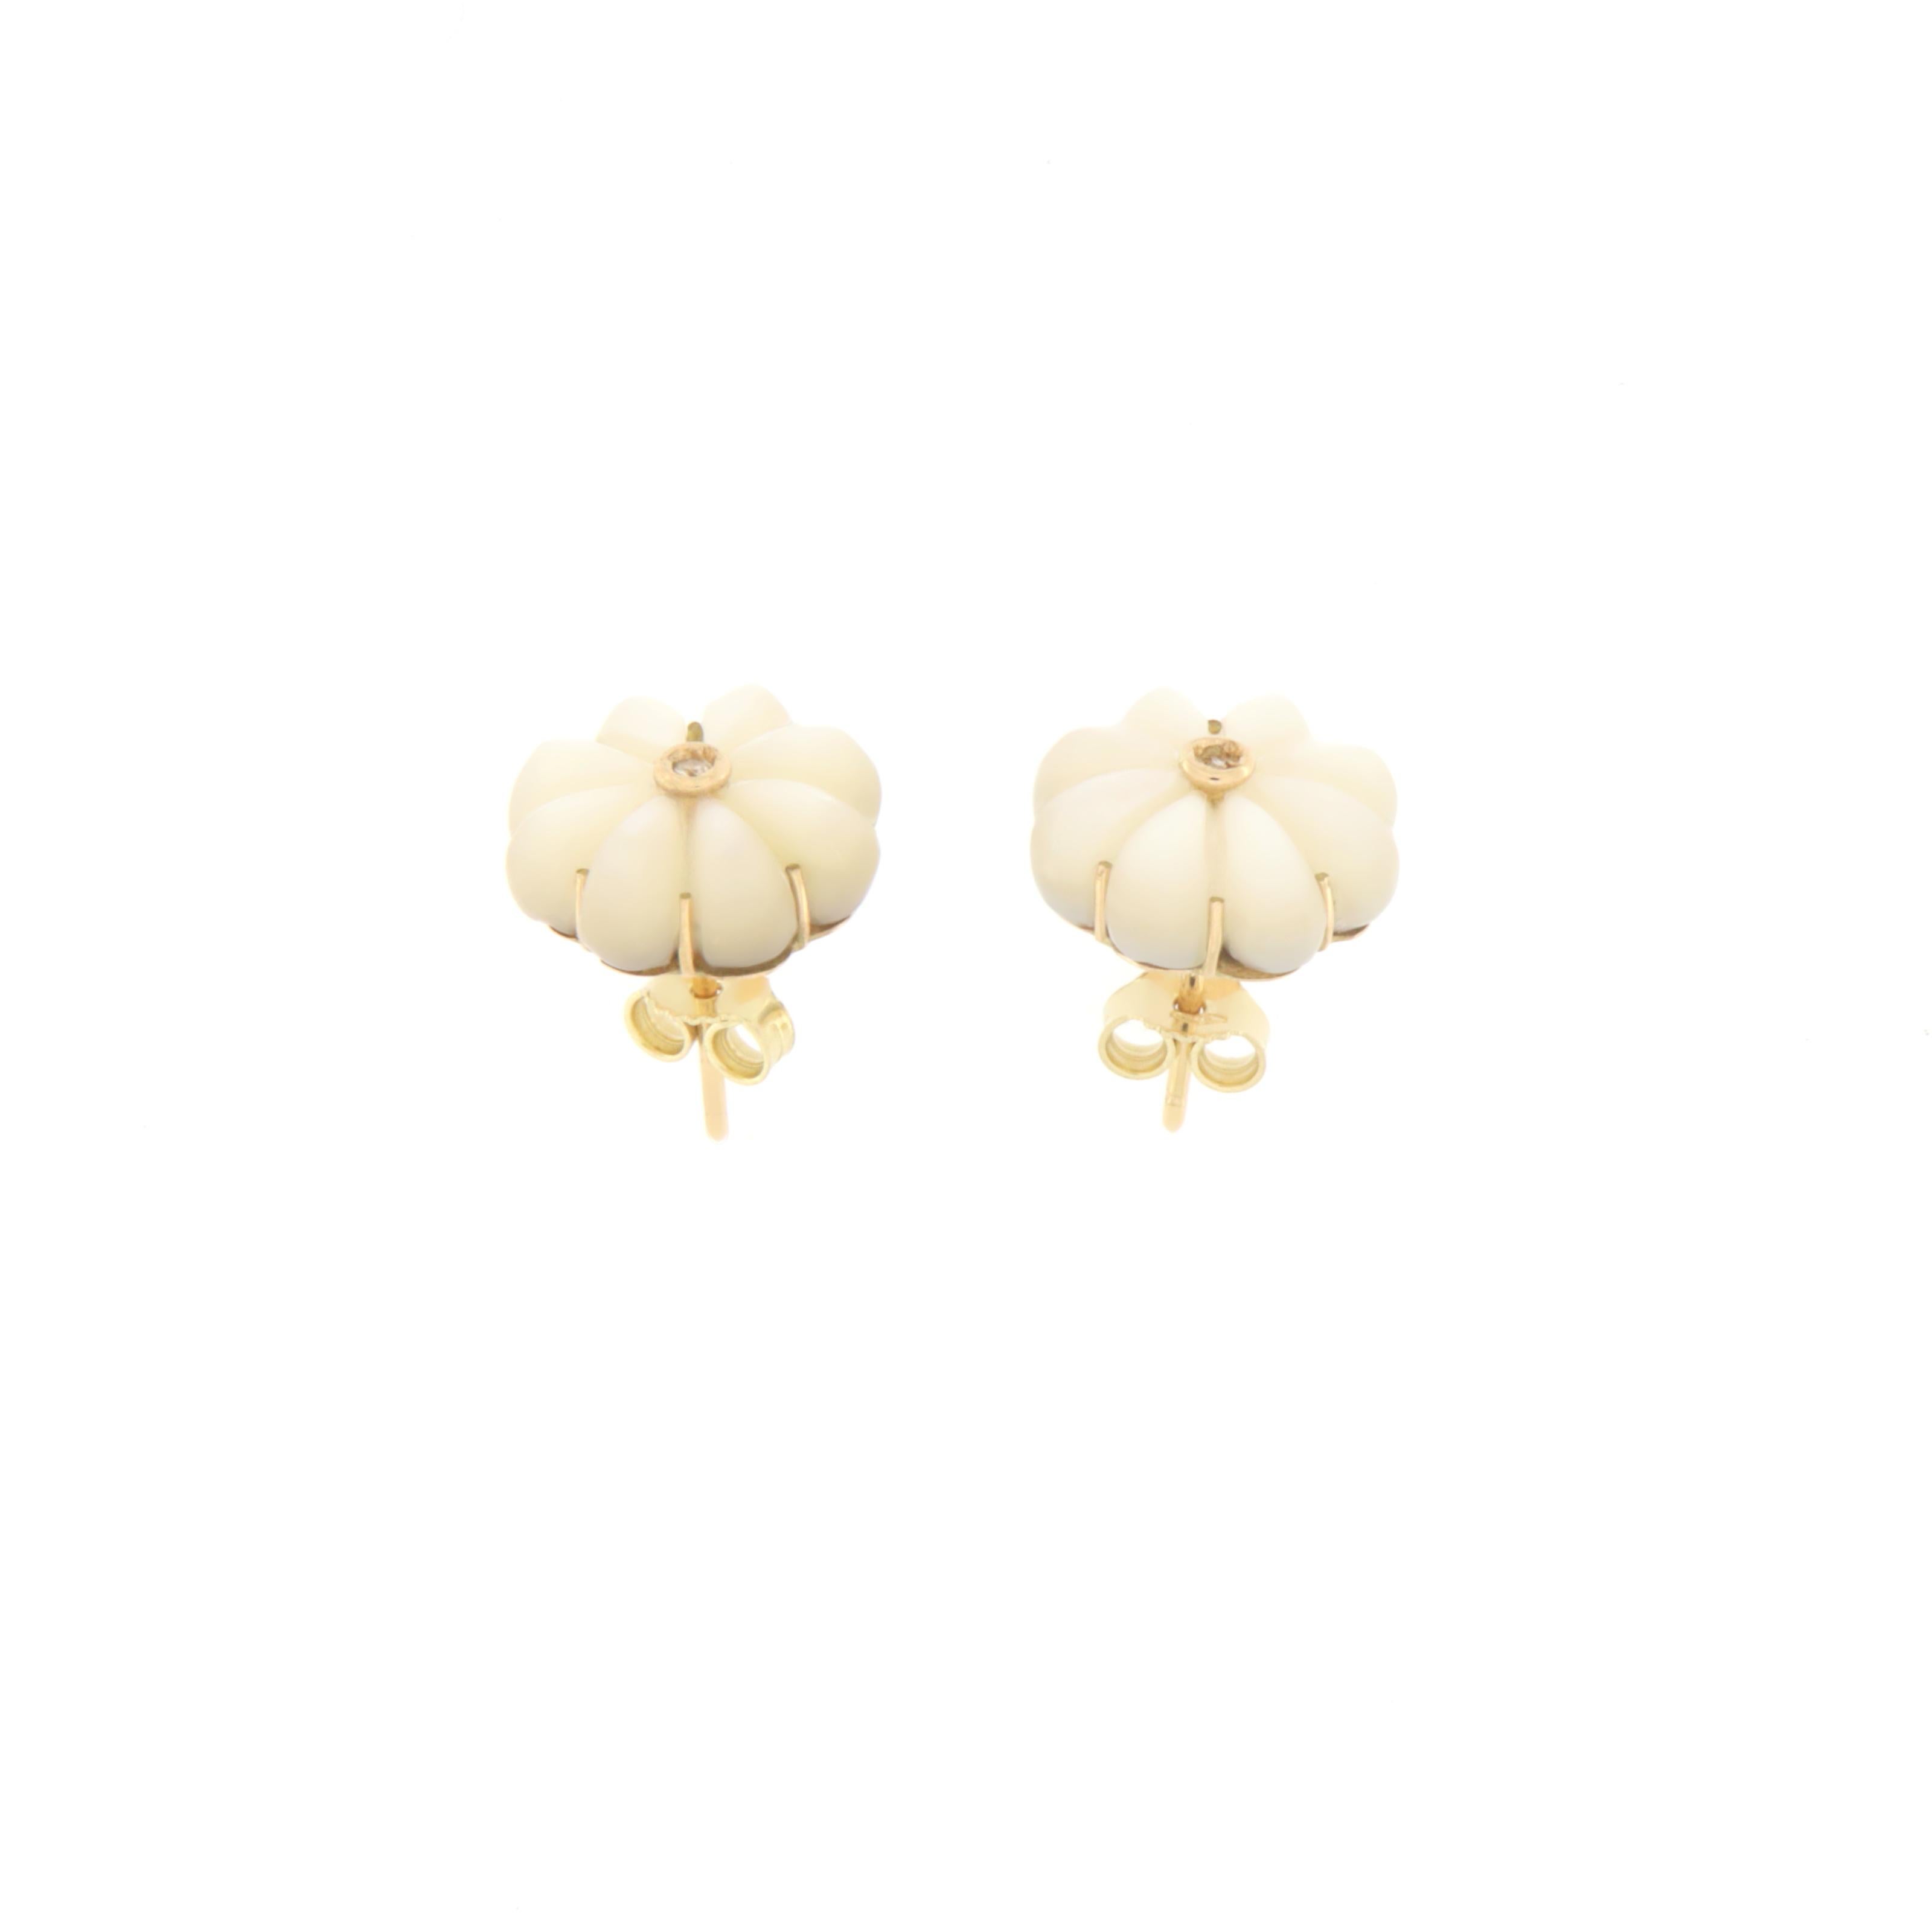 
9 karat yellow gold stud earrings. Handmade by our artisans assembled with mother-of-pearls and diamonds

Earrings total weight 6 grams
Diamonds weight 0.03 karat